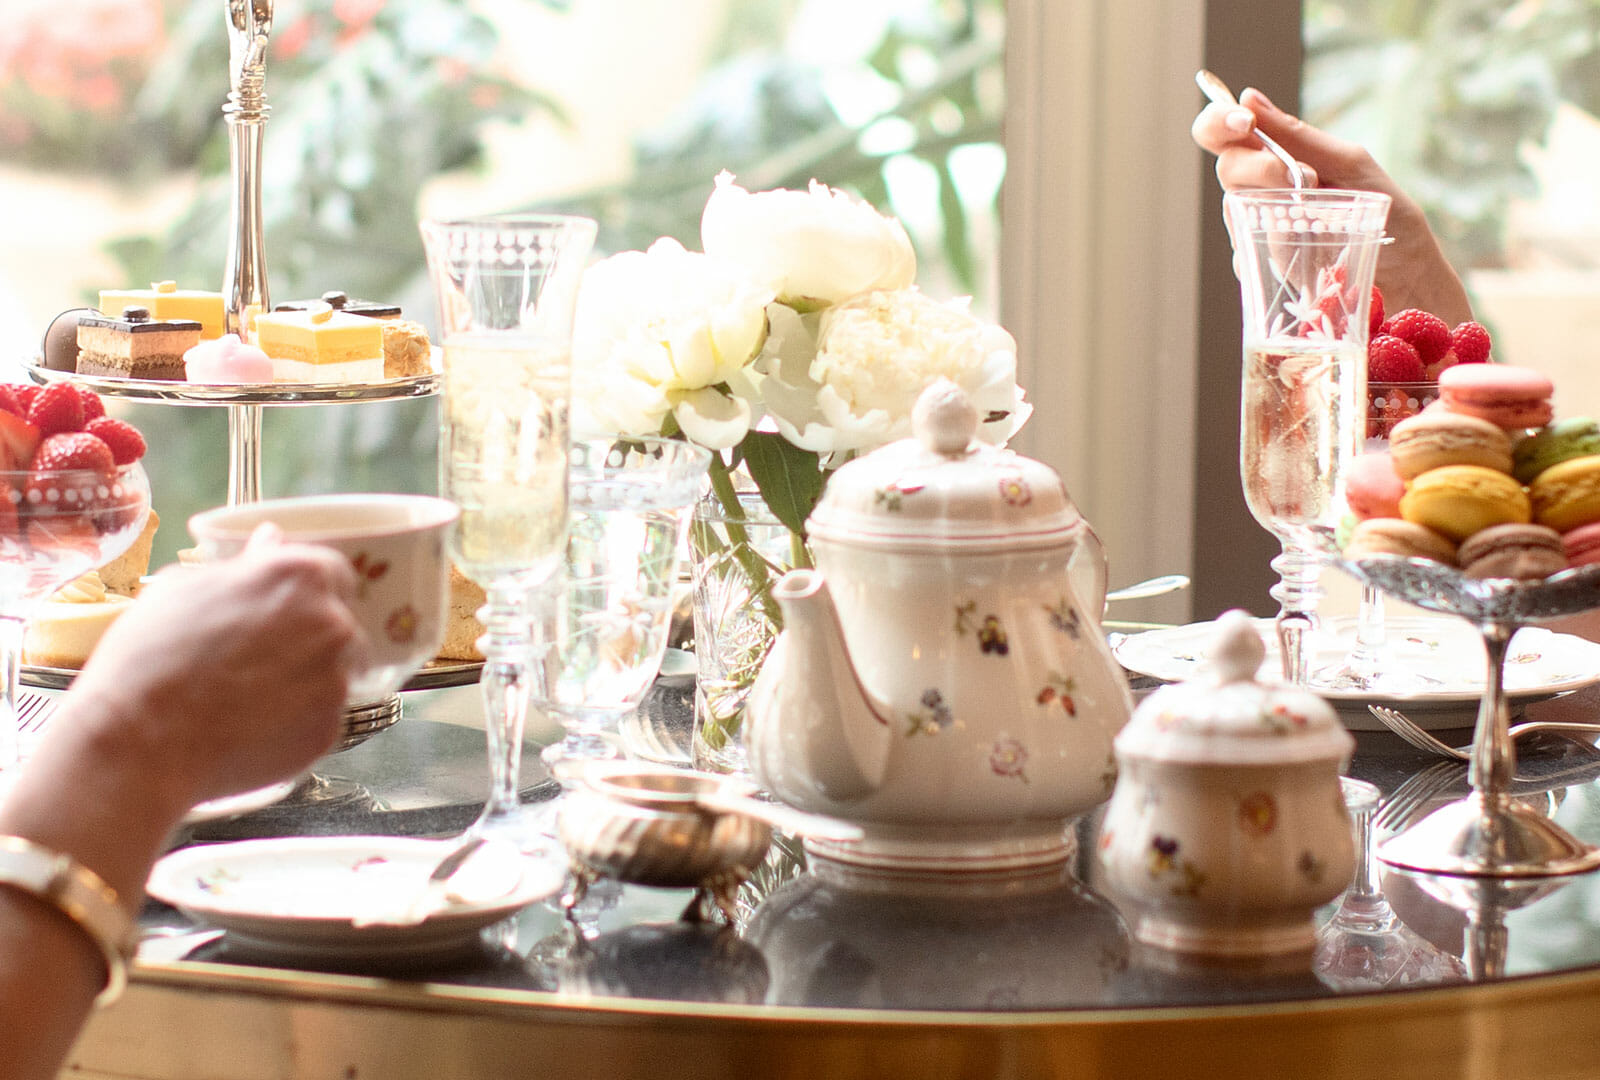 The Westgate Hotel Afternoon Tea spread with pastries and floral centerpiece